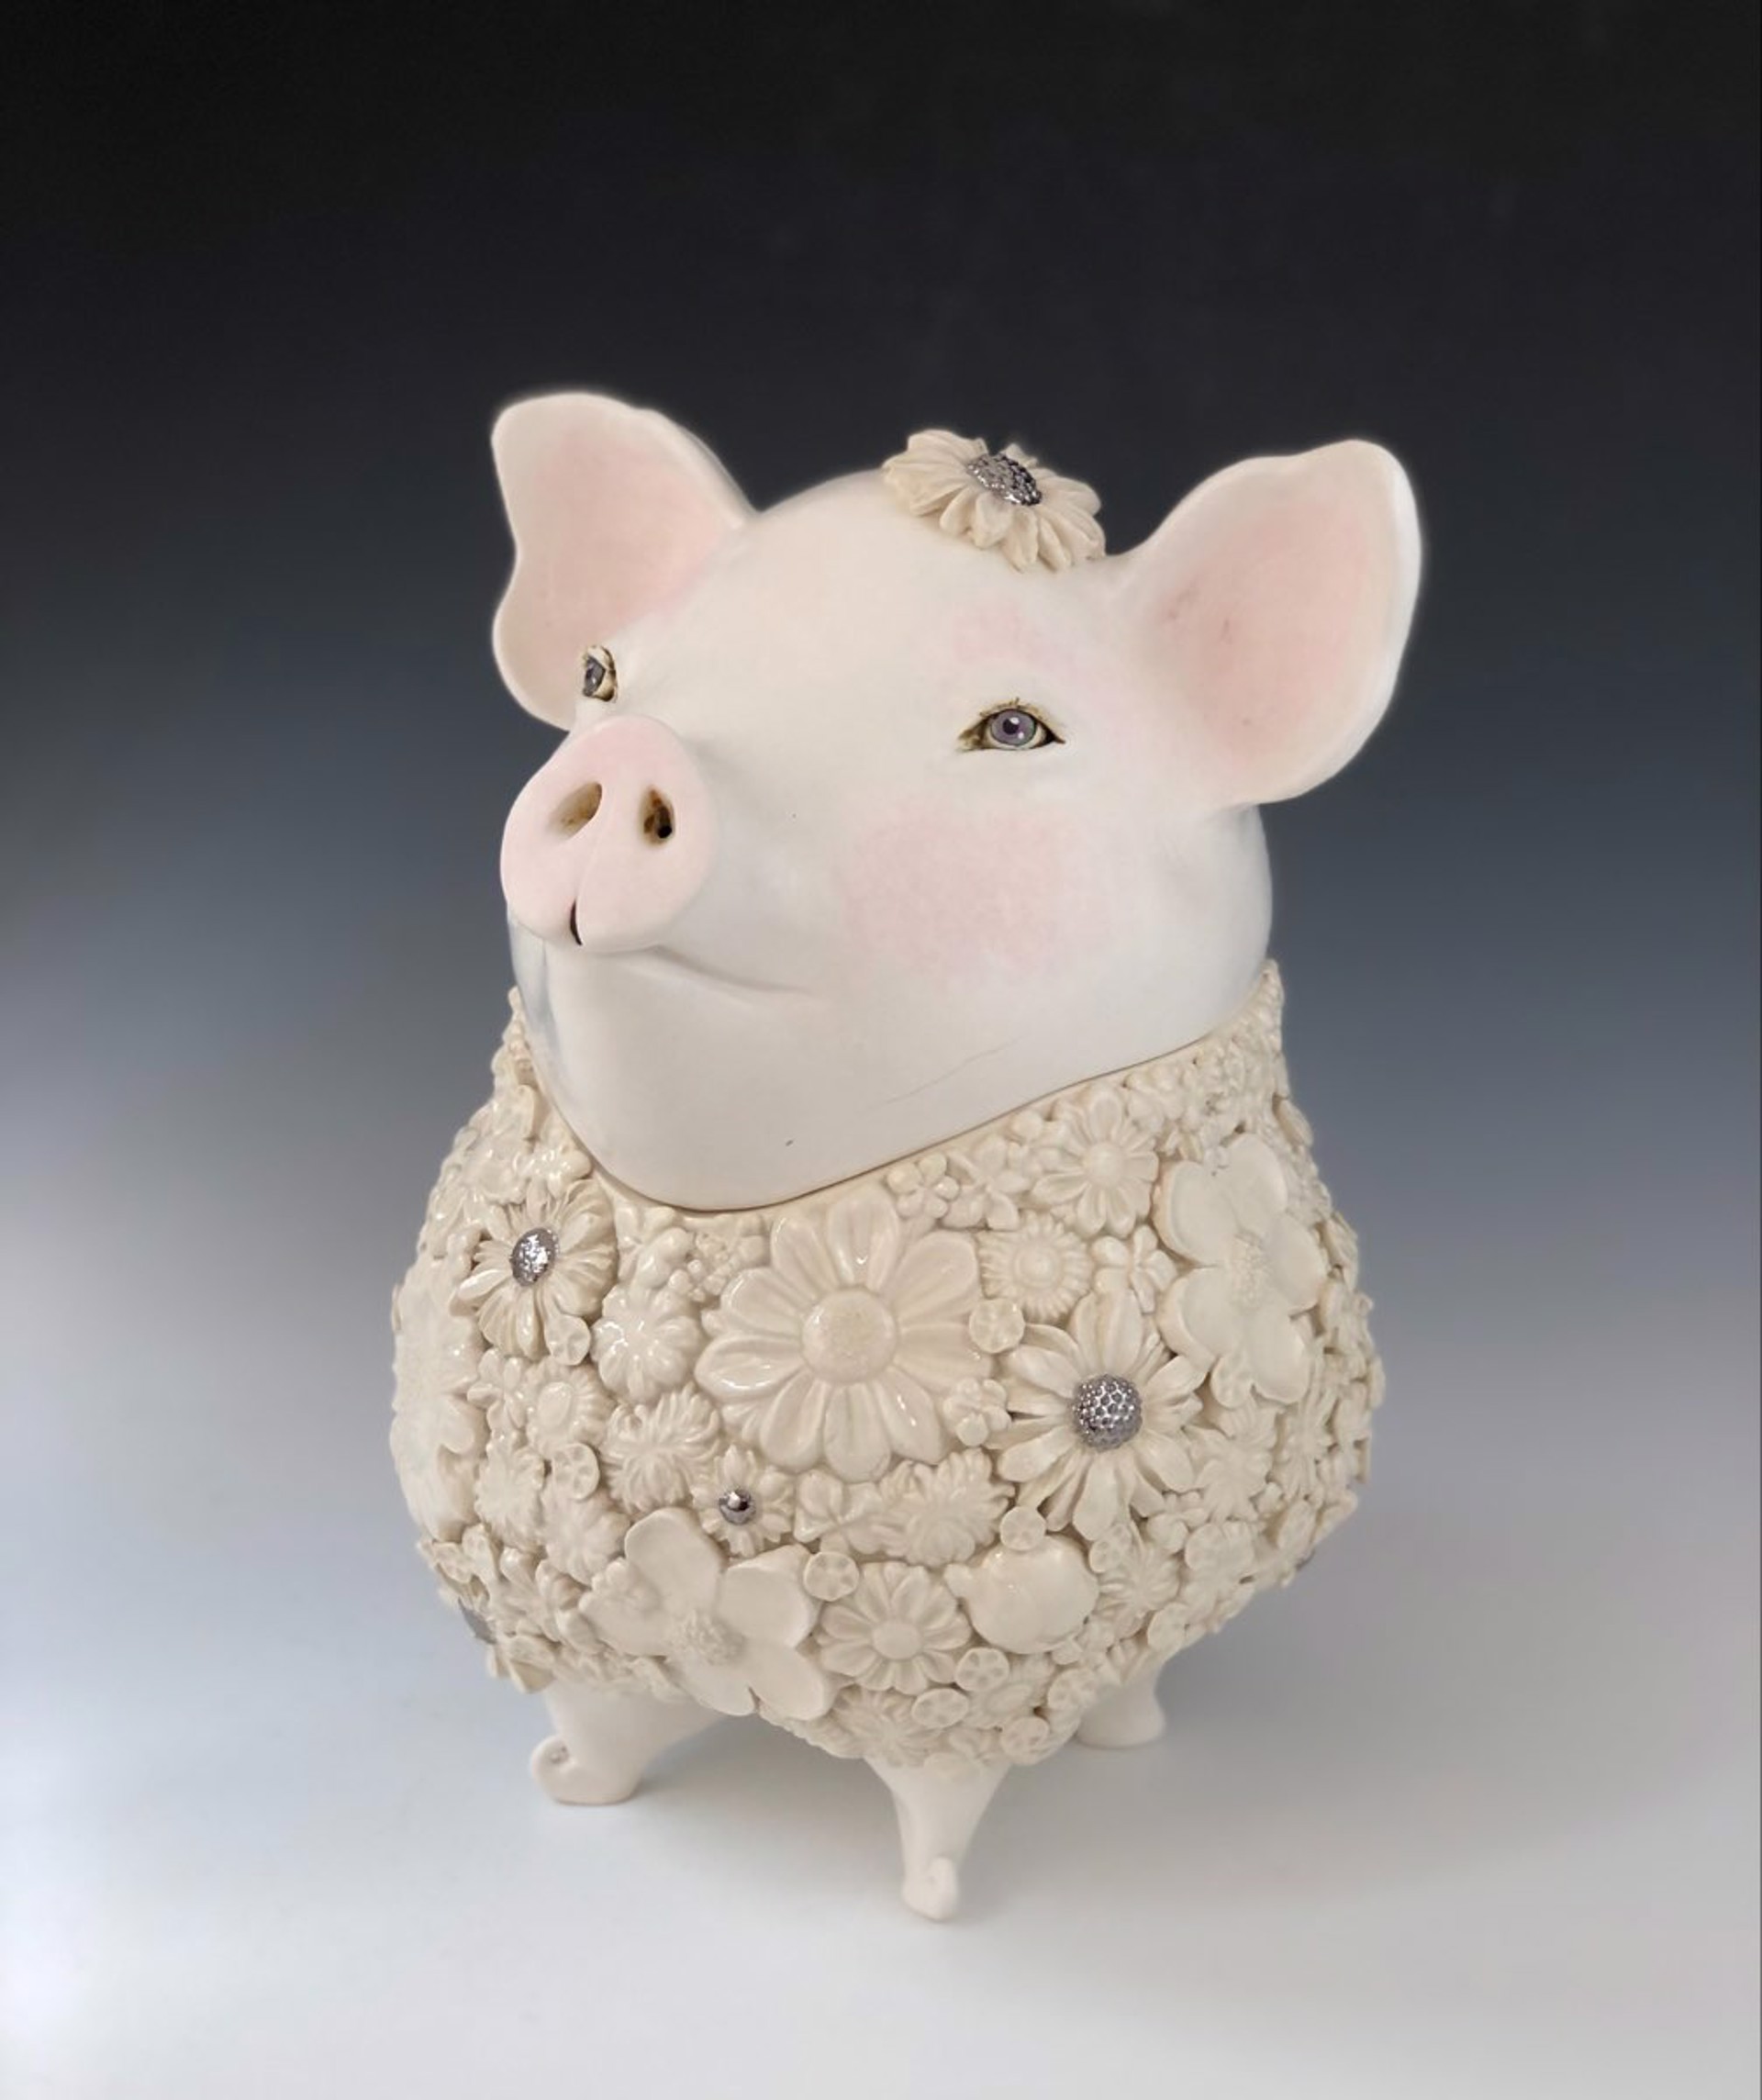 The Pig Jar by Lisa Hager